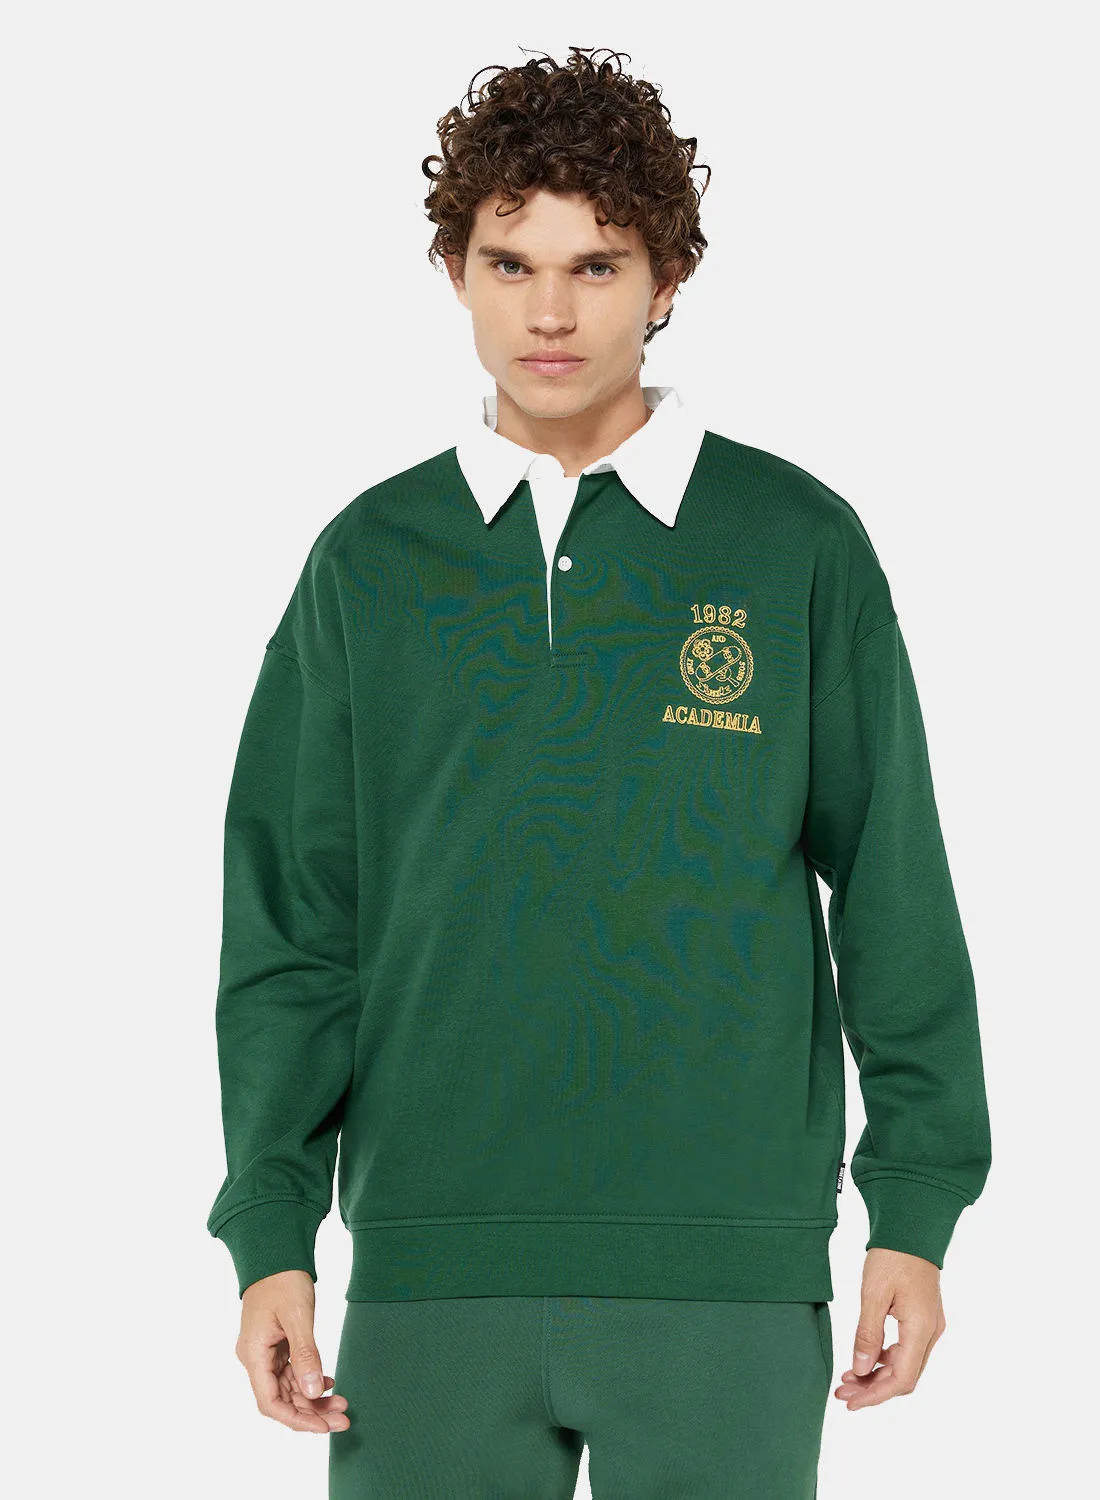 ONLY & SONS 1982 Academia Rugby Polo